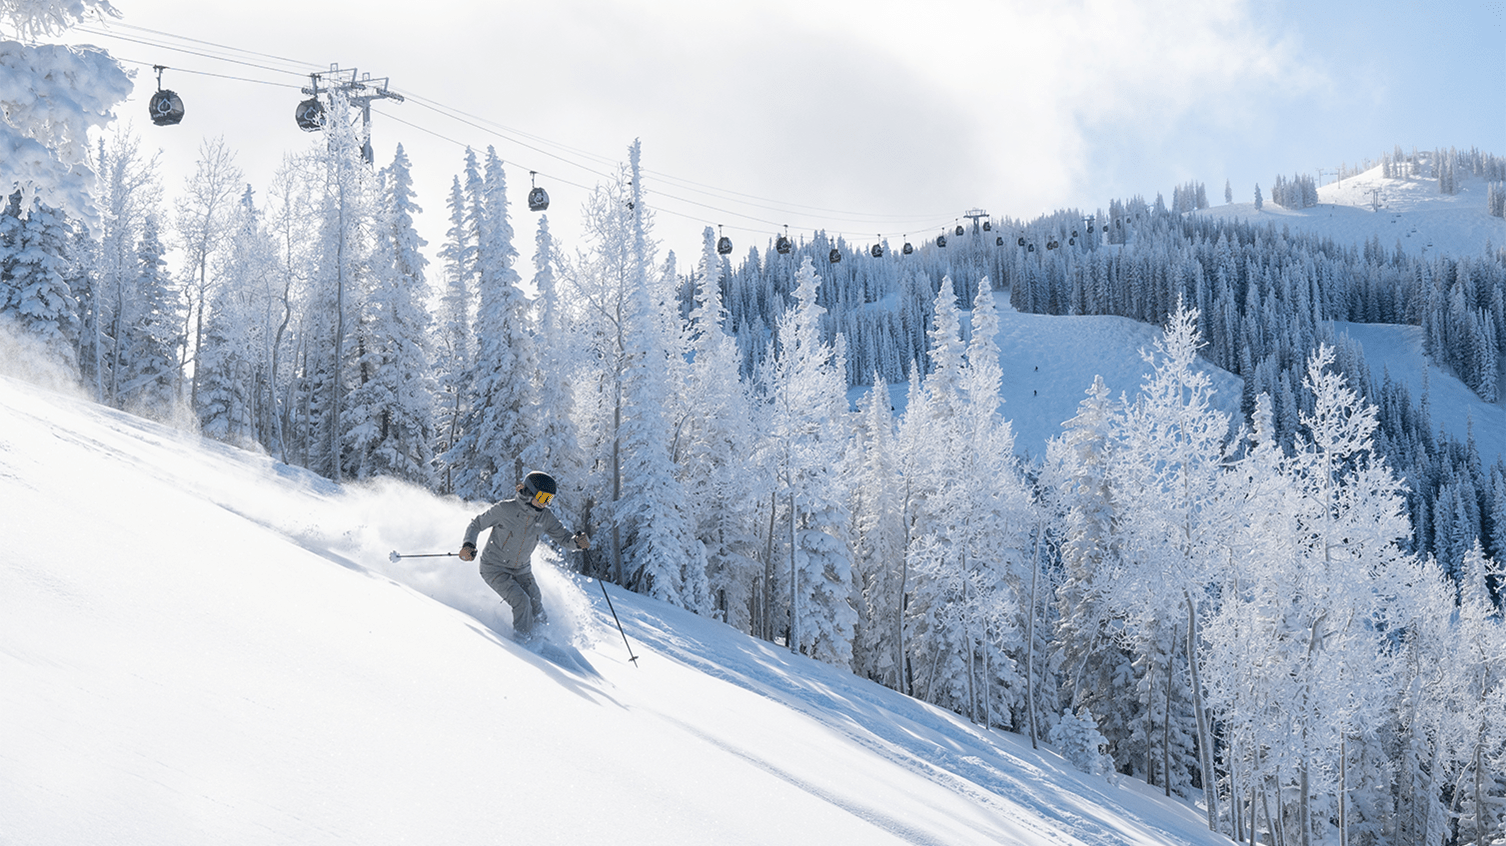 Skier in deep powder on Aspen Mountain, under the gondola. Blue skies above snowy trees and powder.